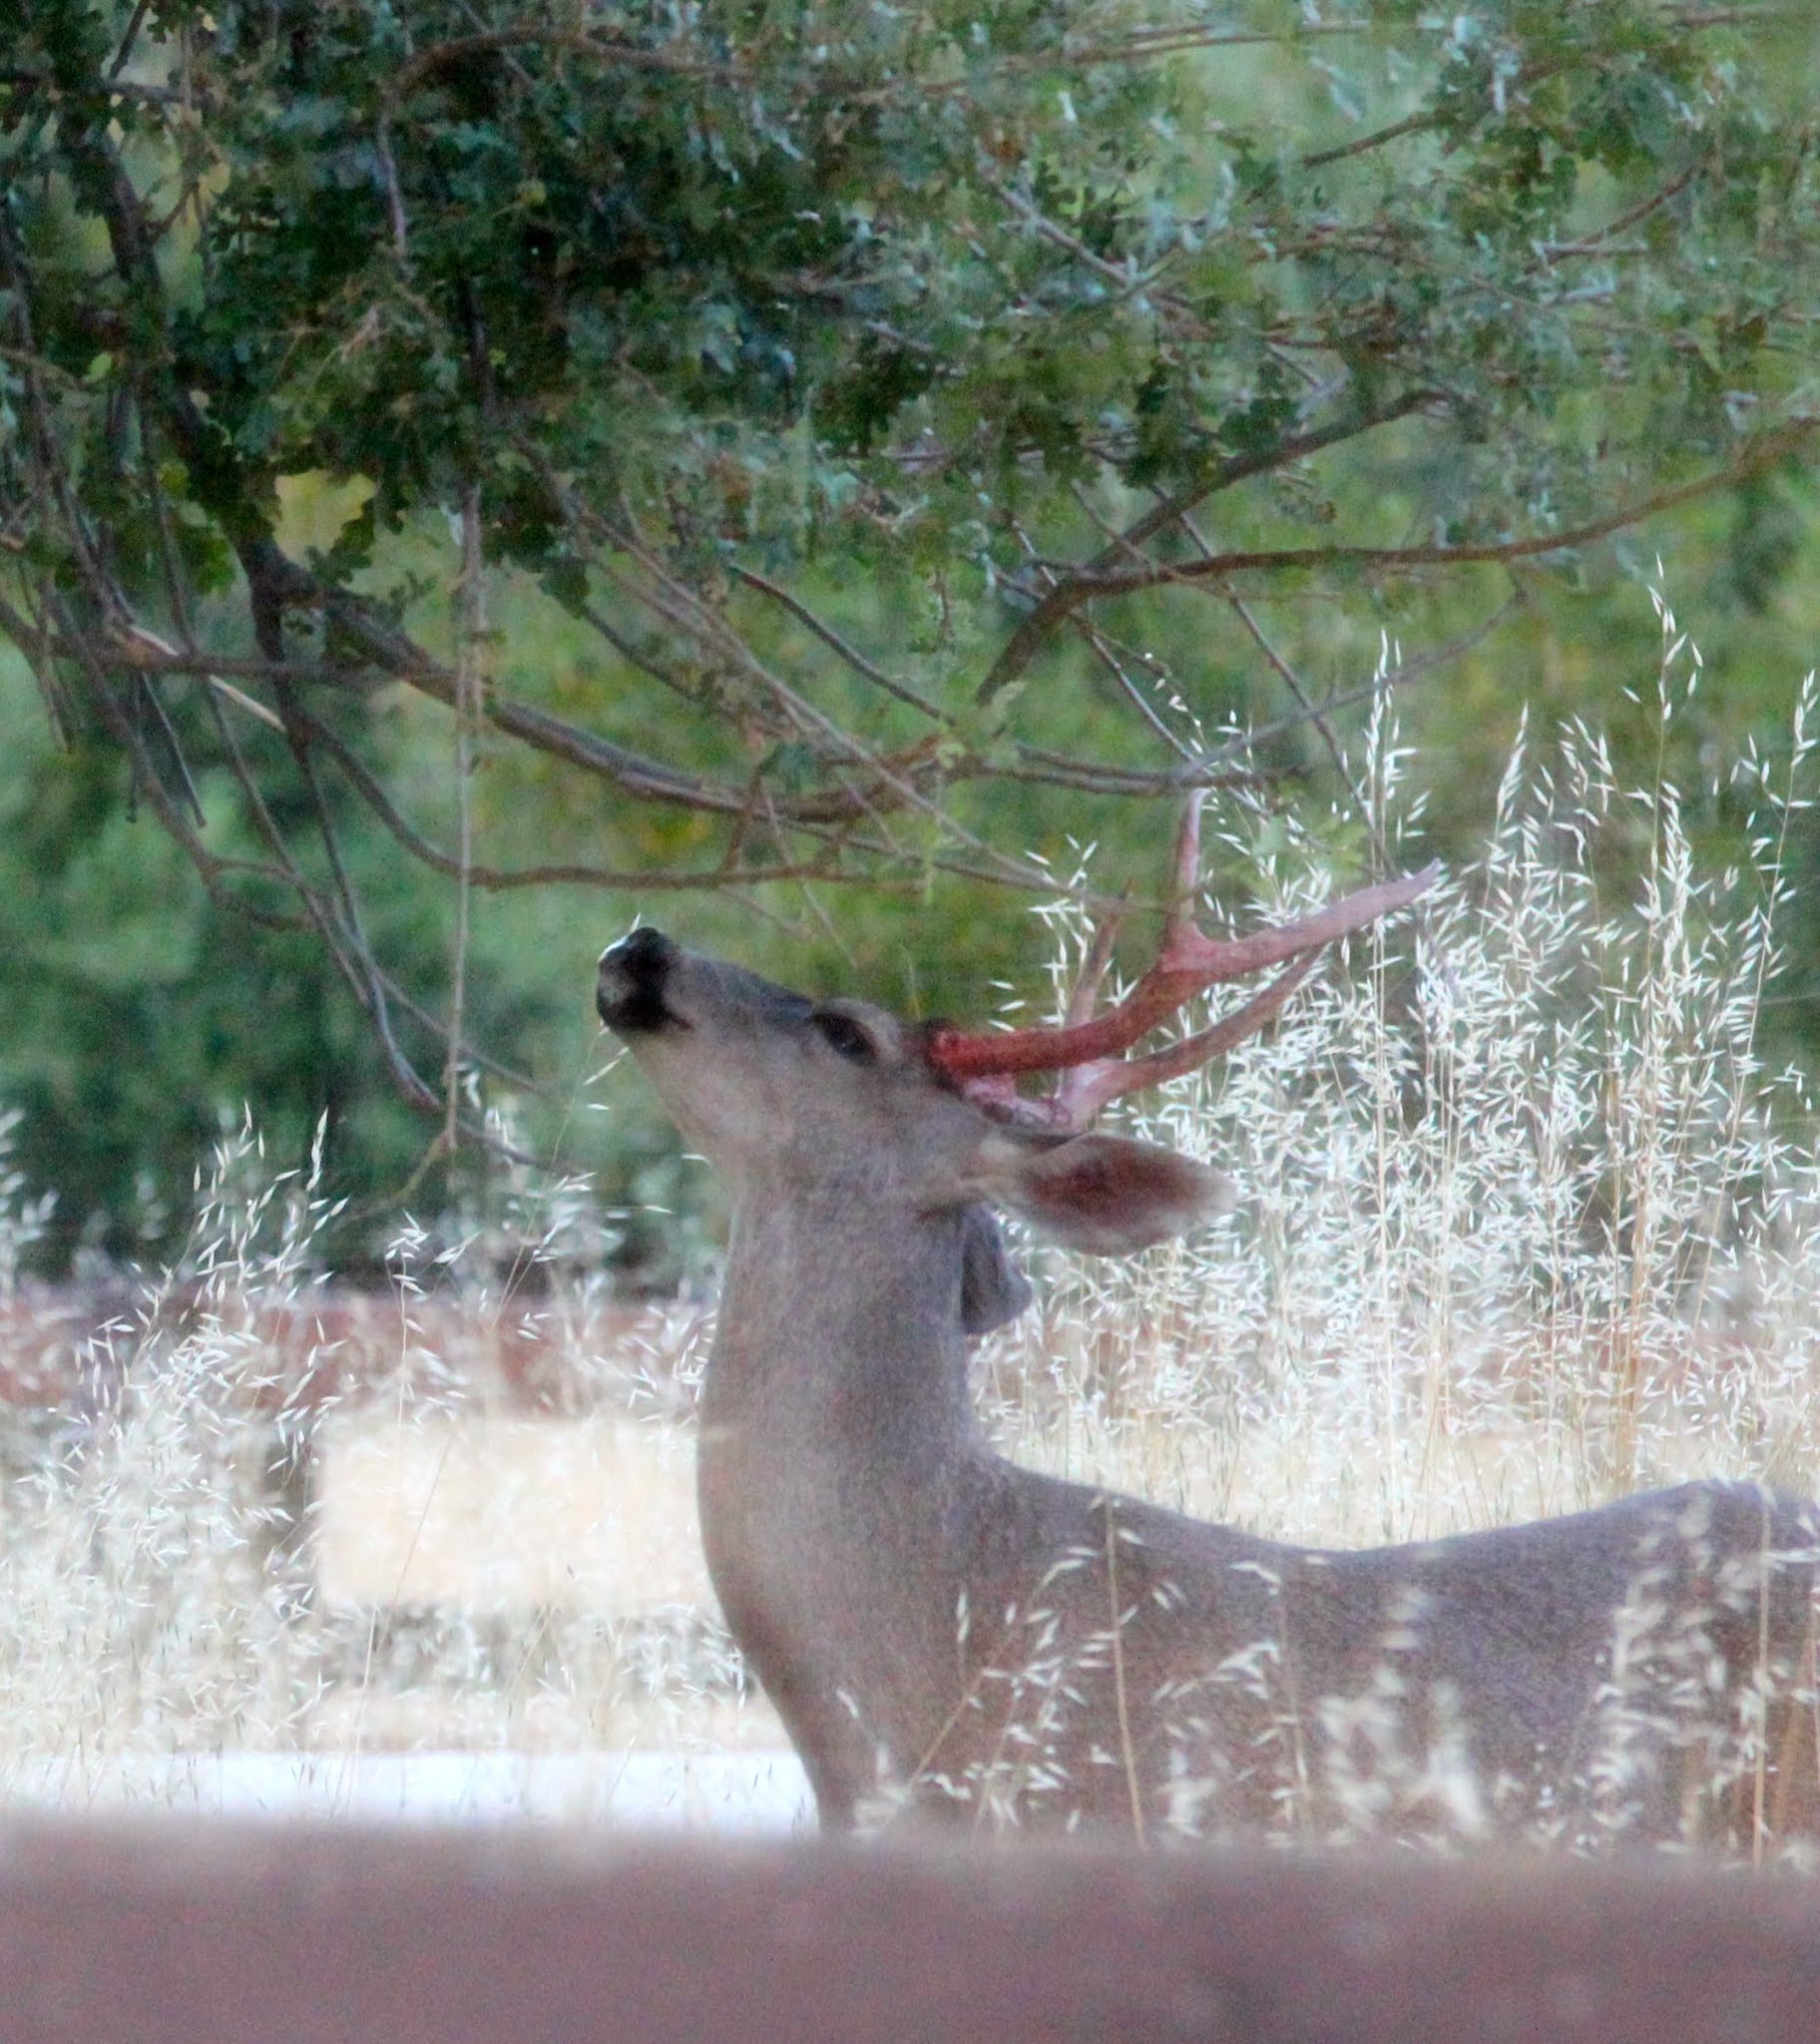 The velvet has done its job for this buck